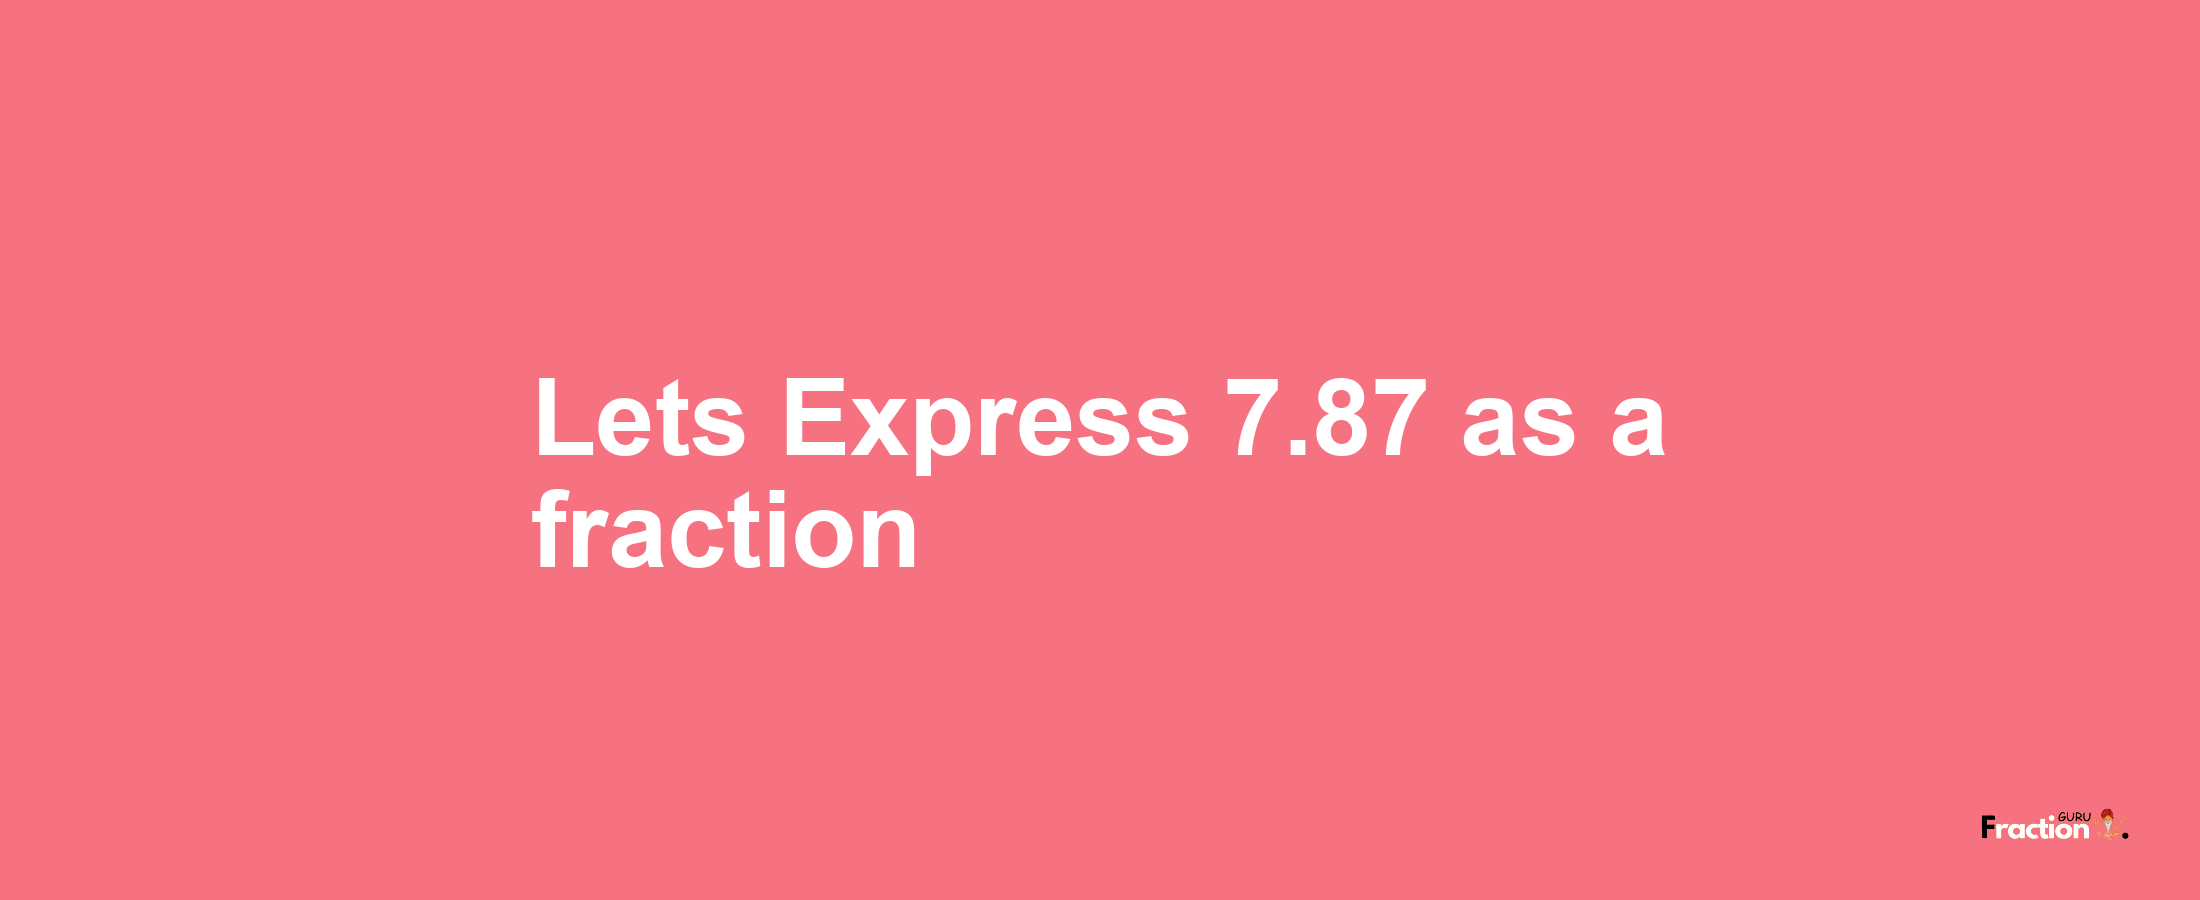 Lets Express 7.87 as afraction